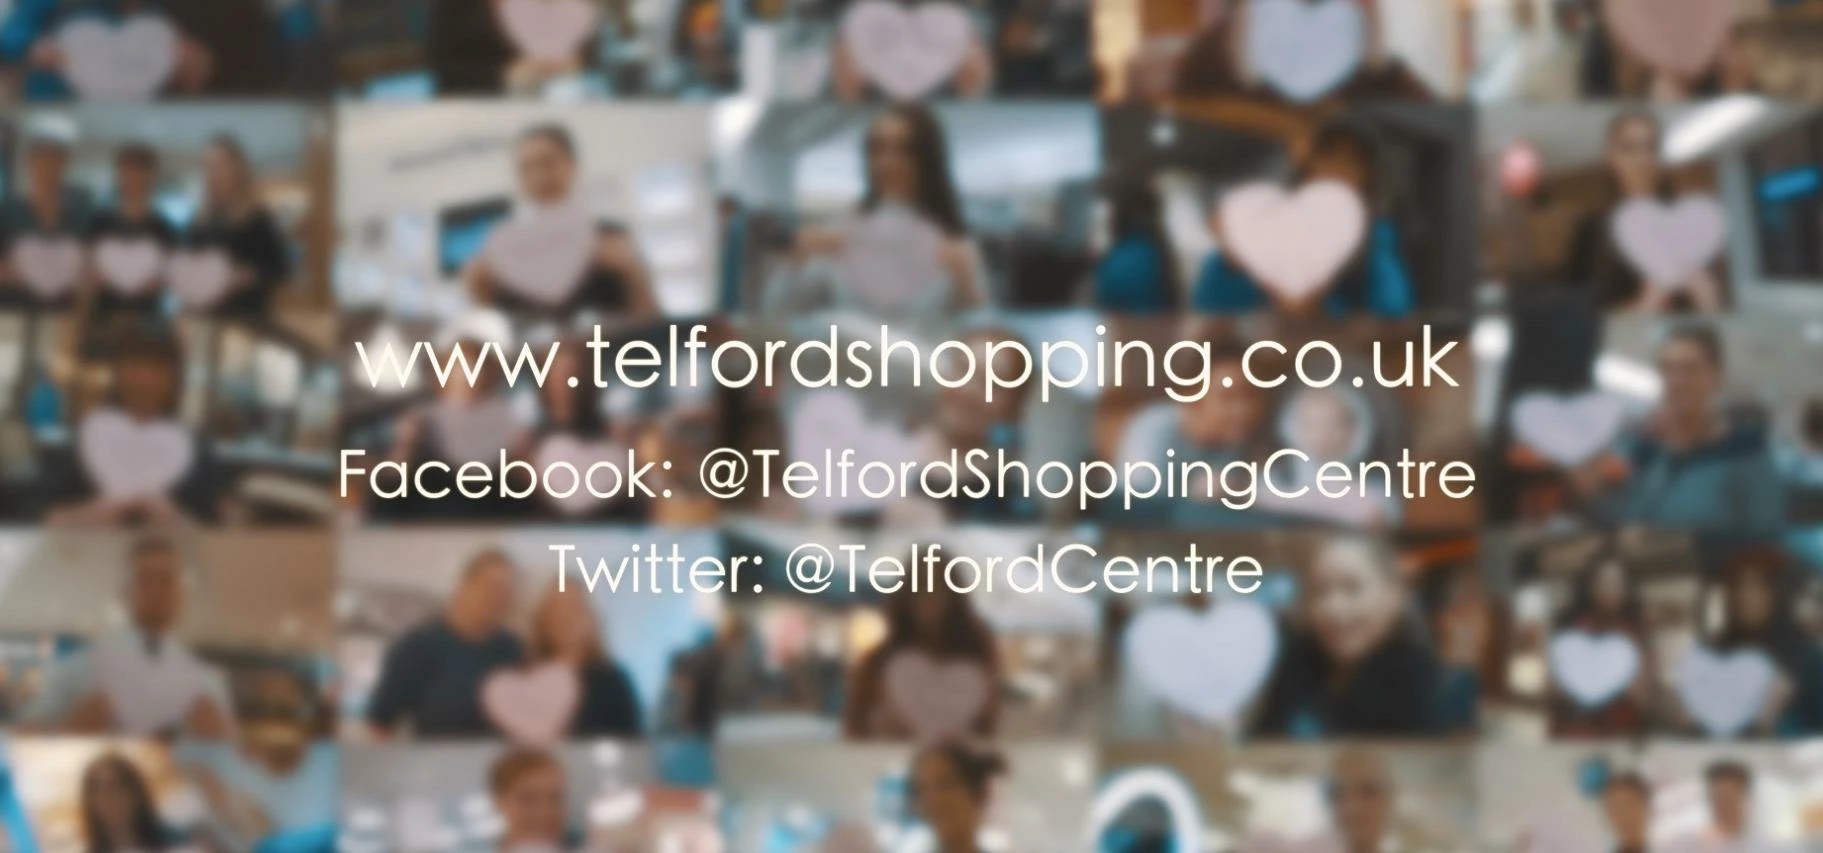 Dozens of people wrote messages for Telford Shopping Centre's "wall of love"